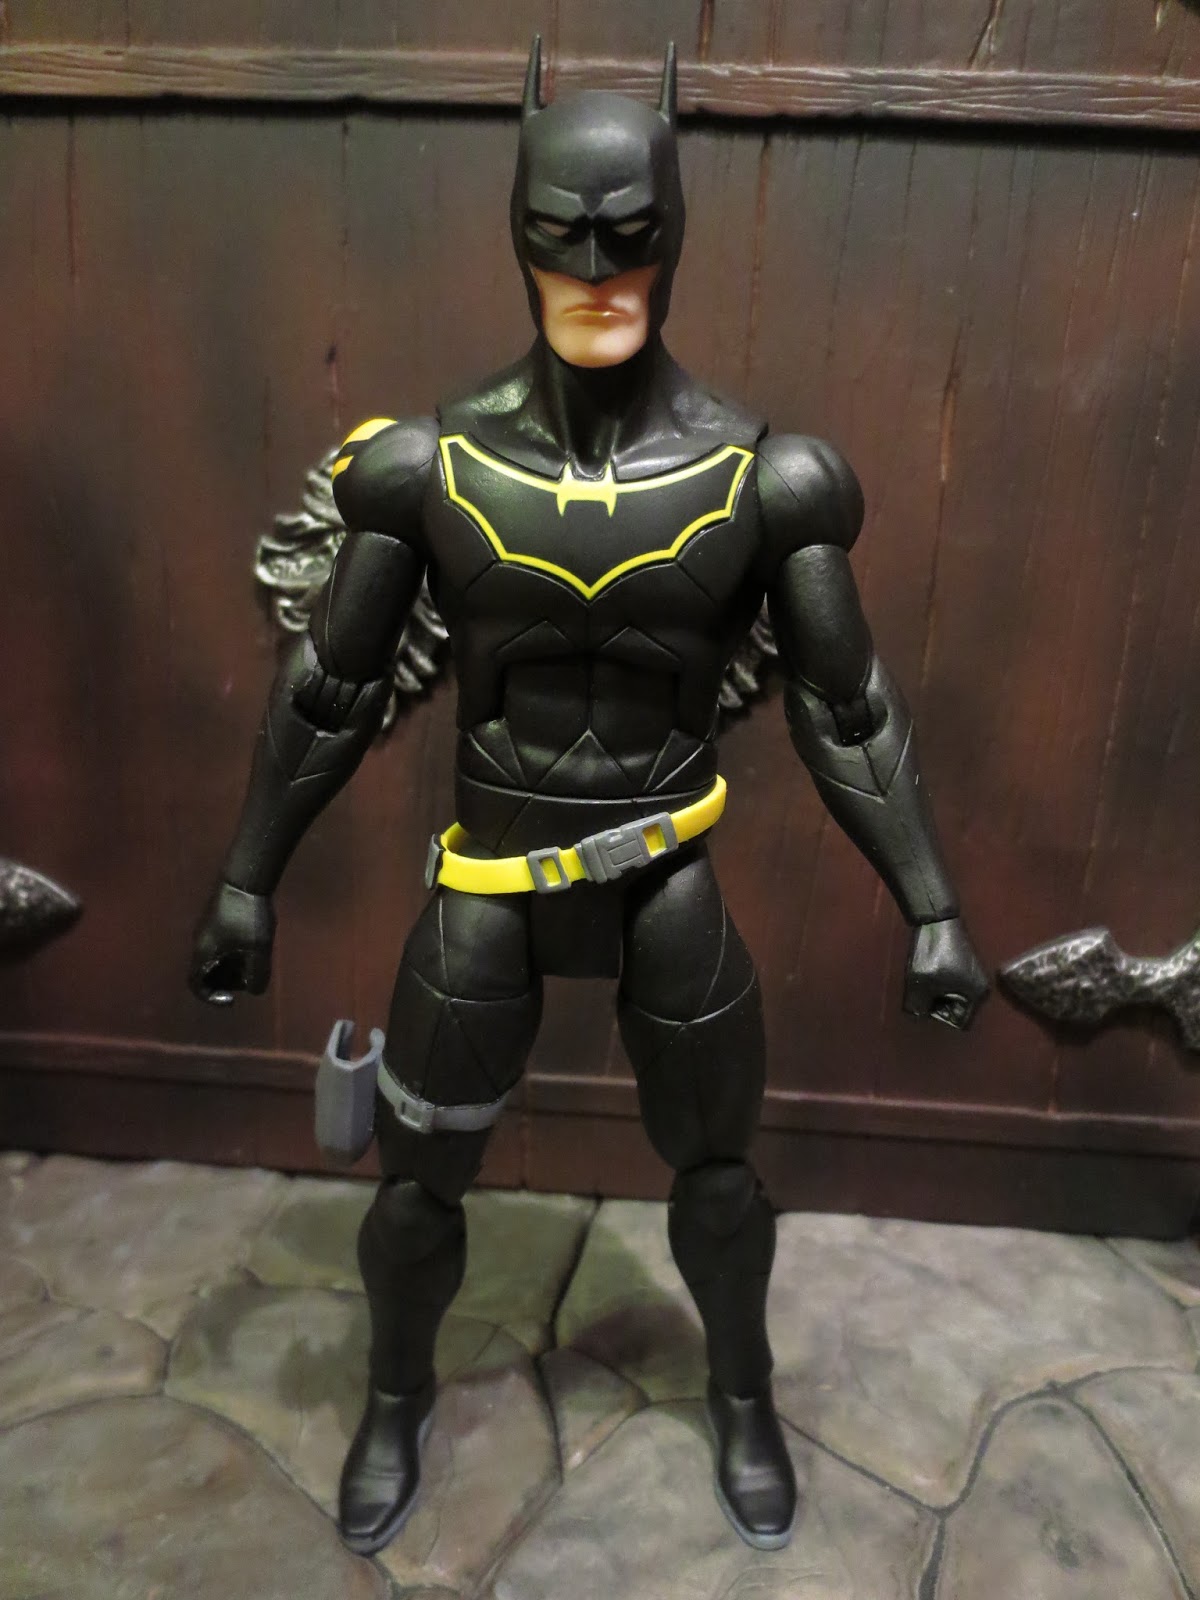 Action Figure Barbecue: Christmas Haul 2016: GCPD Batman from DC